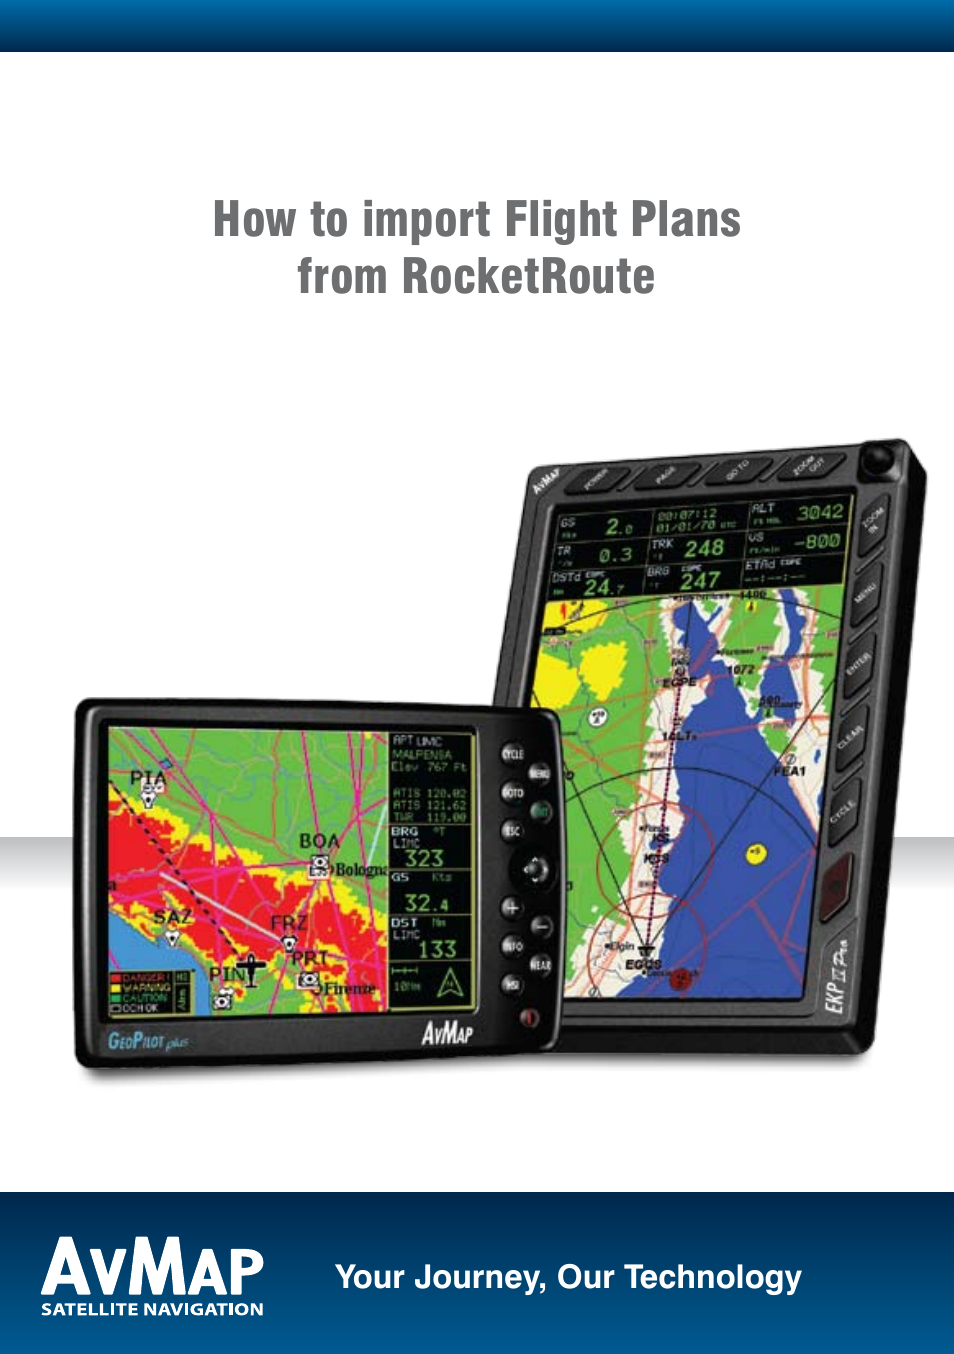 Importing Flight Plans from RocketRoute